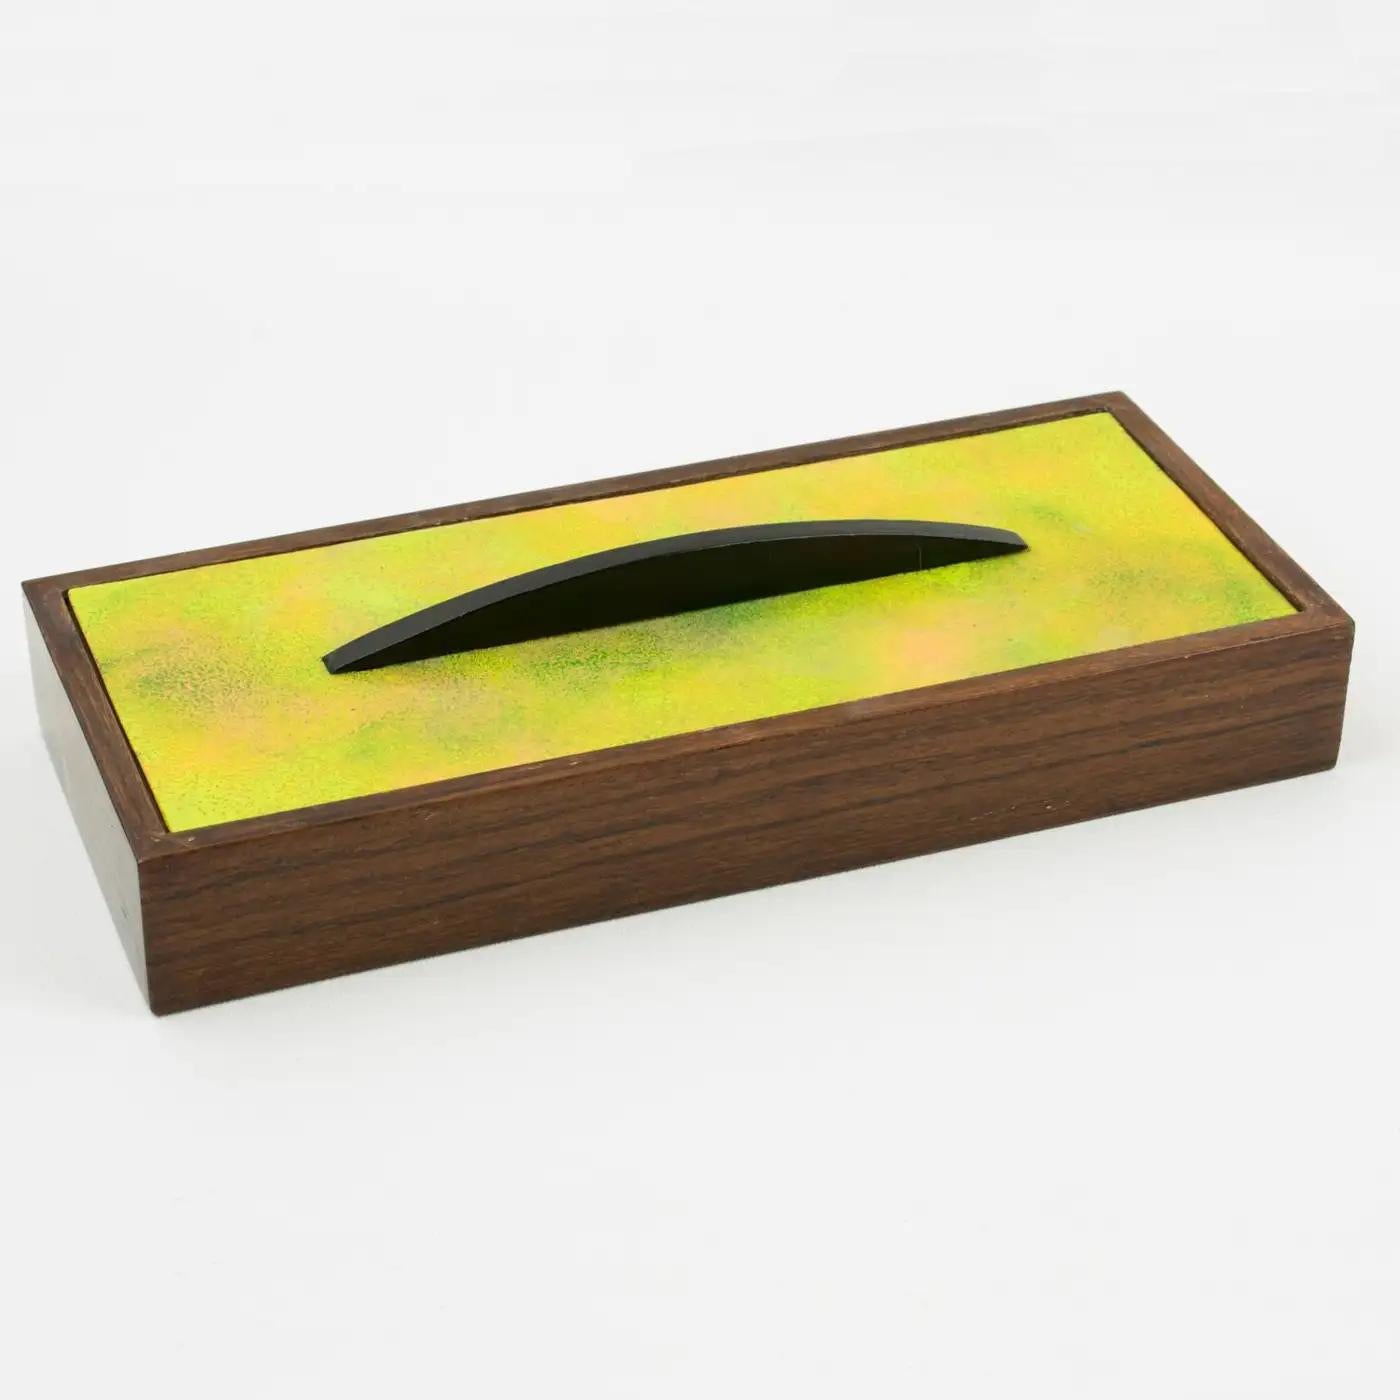 Paolo De Poli, Italy, crafted this beautiful Mid-Century decorative lidded box in the 1950s. This design is commonly attributed to Gio Ponti. The flat rectangular shape with a wood base has an enamel-on-copper lid and black wood finial. The stunning